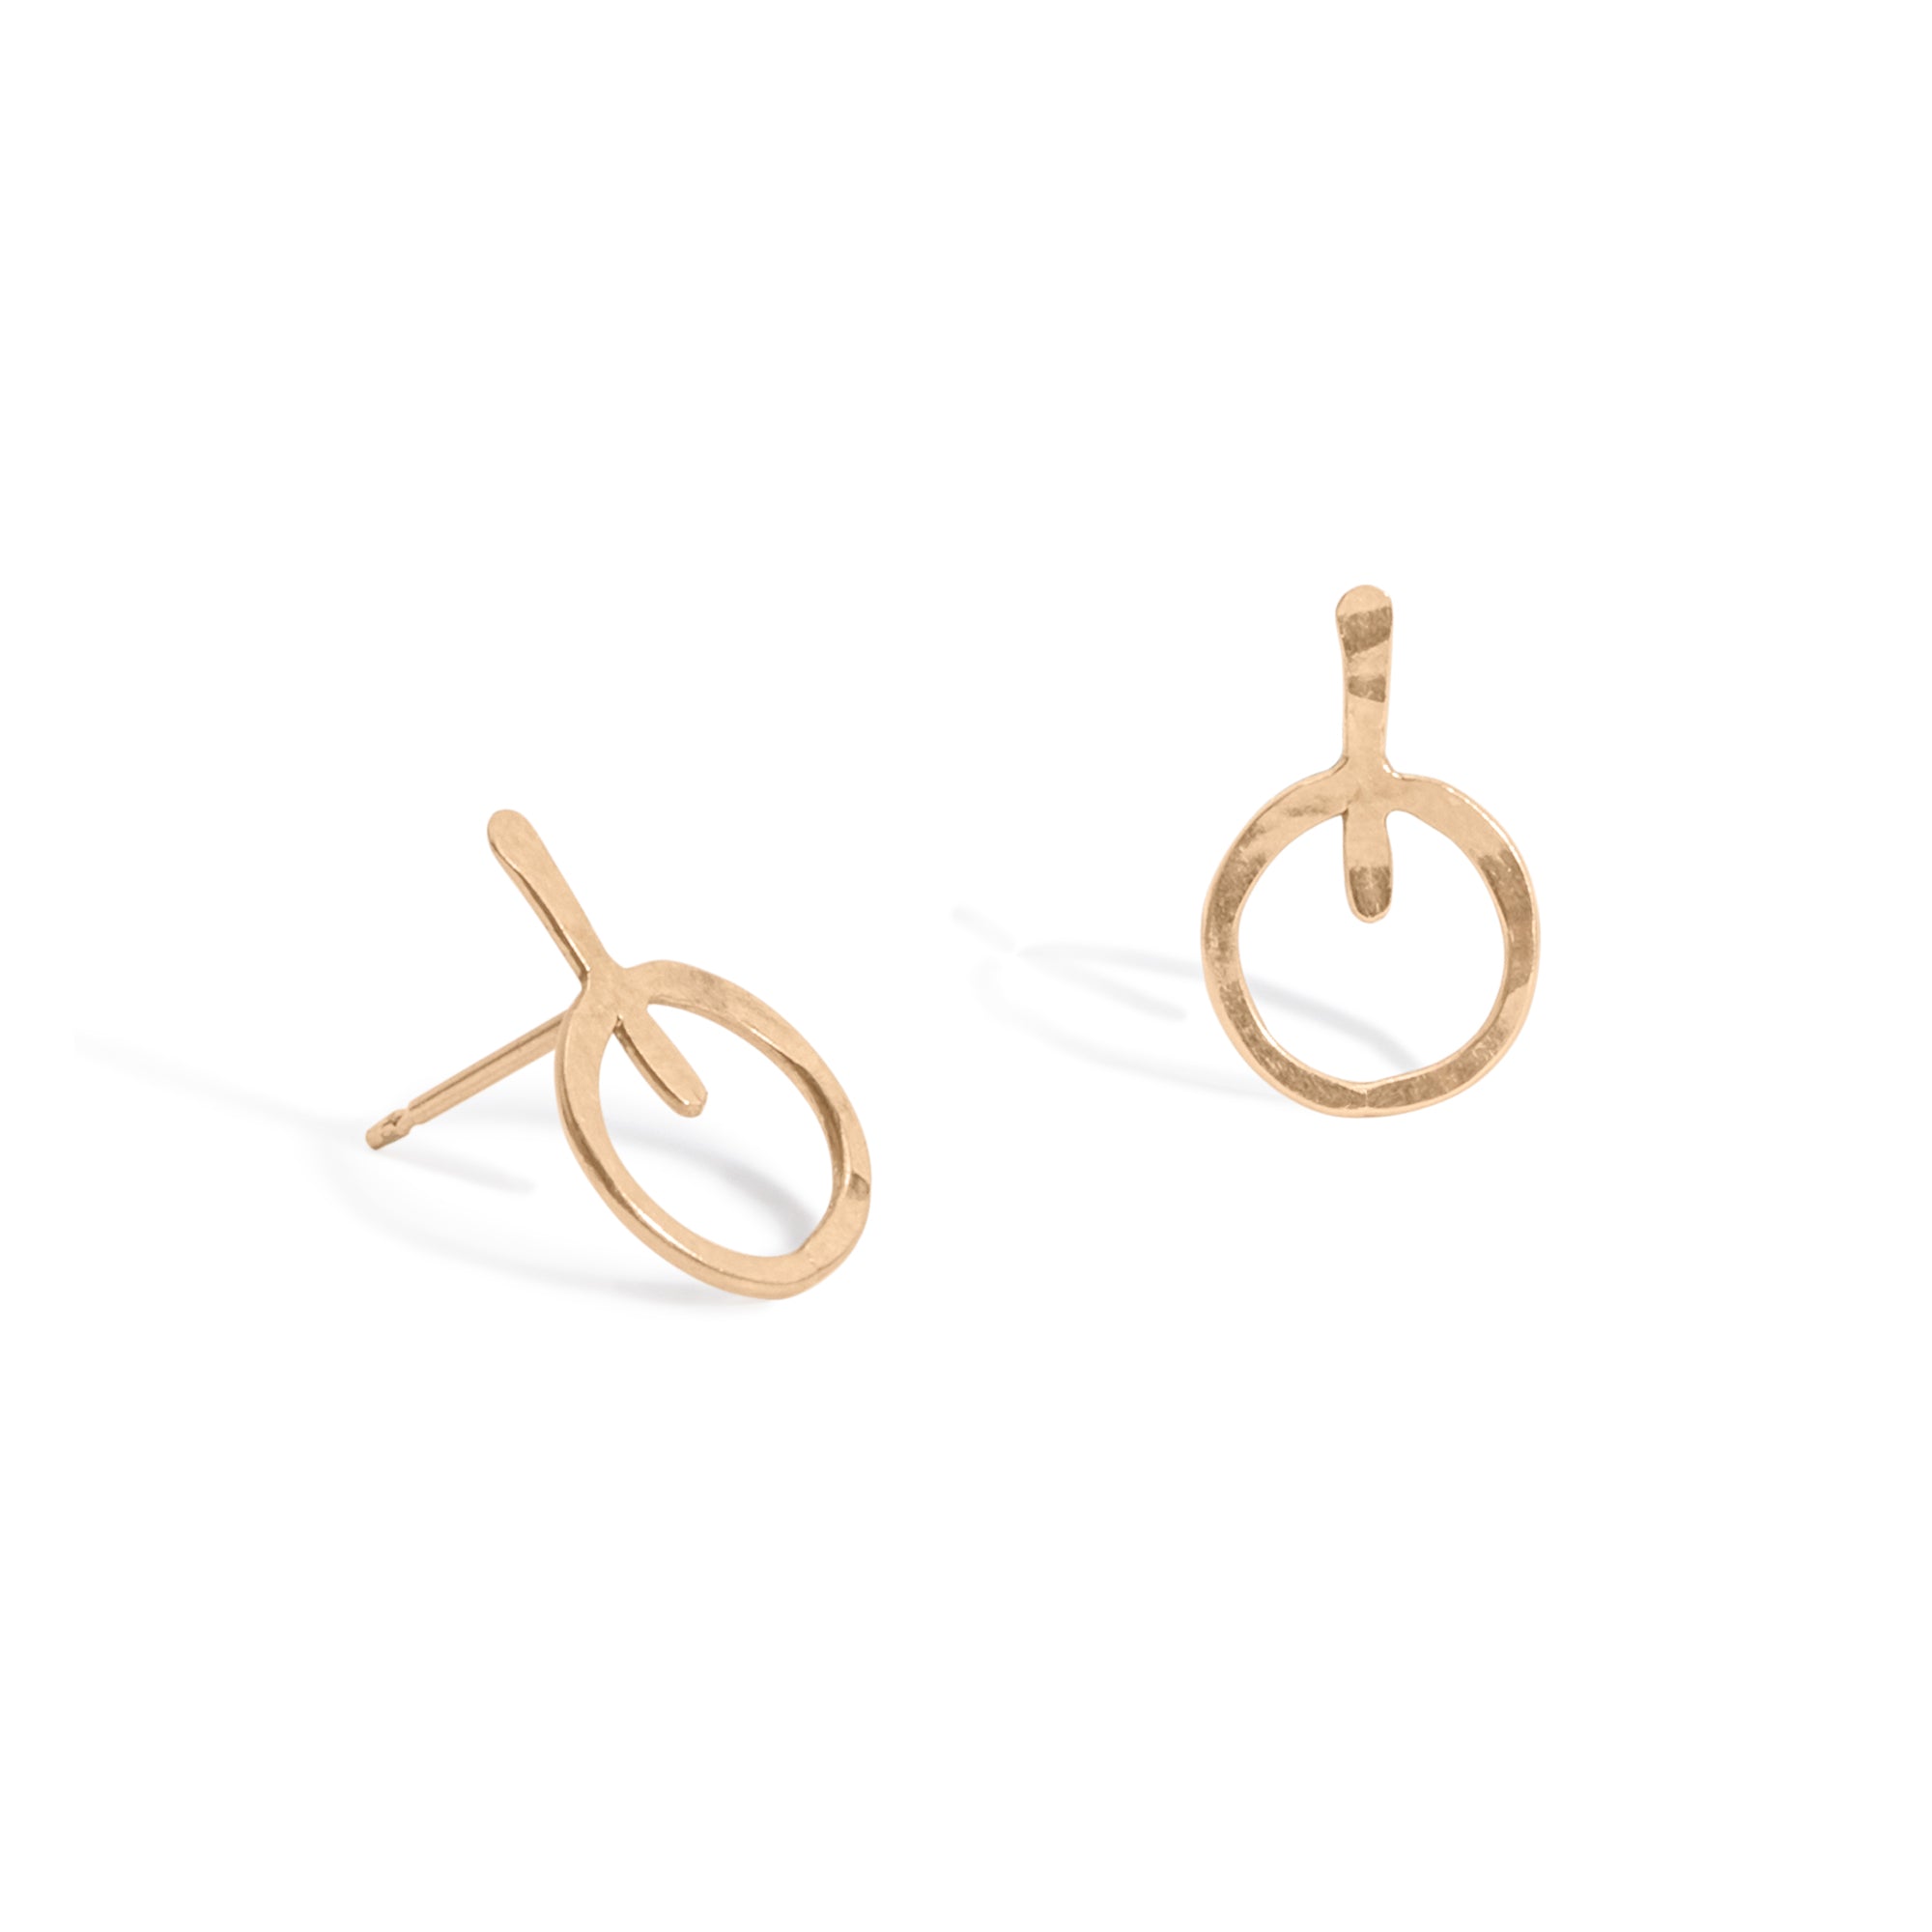 The Evolve Studs, 14k gold earrings featuring a hammered circle attached to a small vertical wire bar.